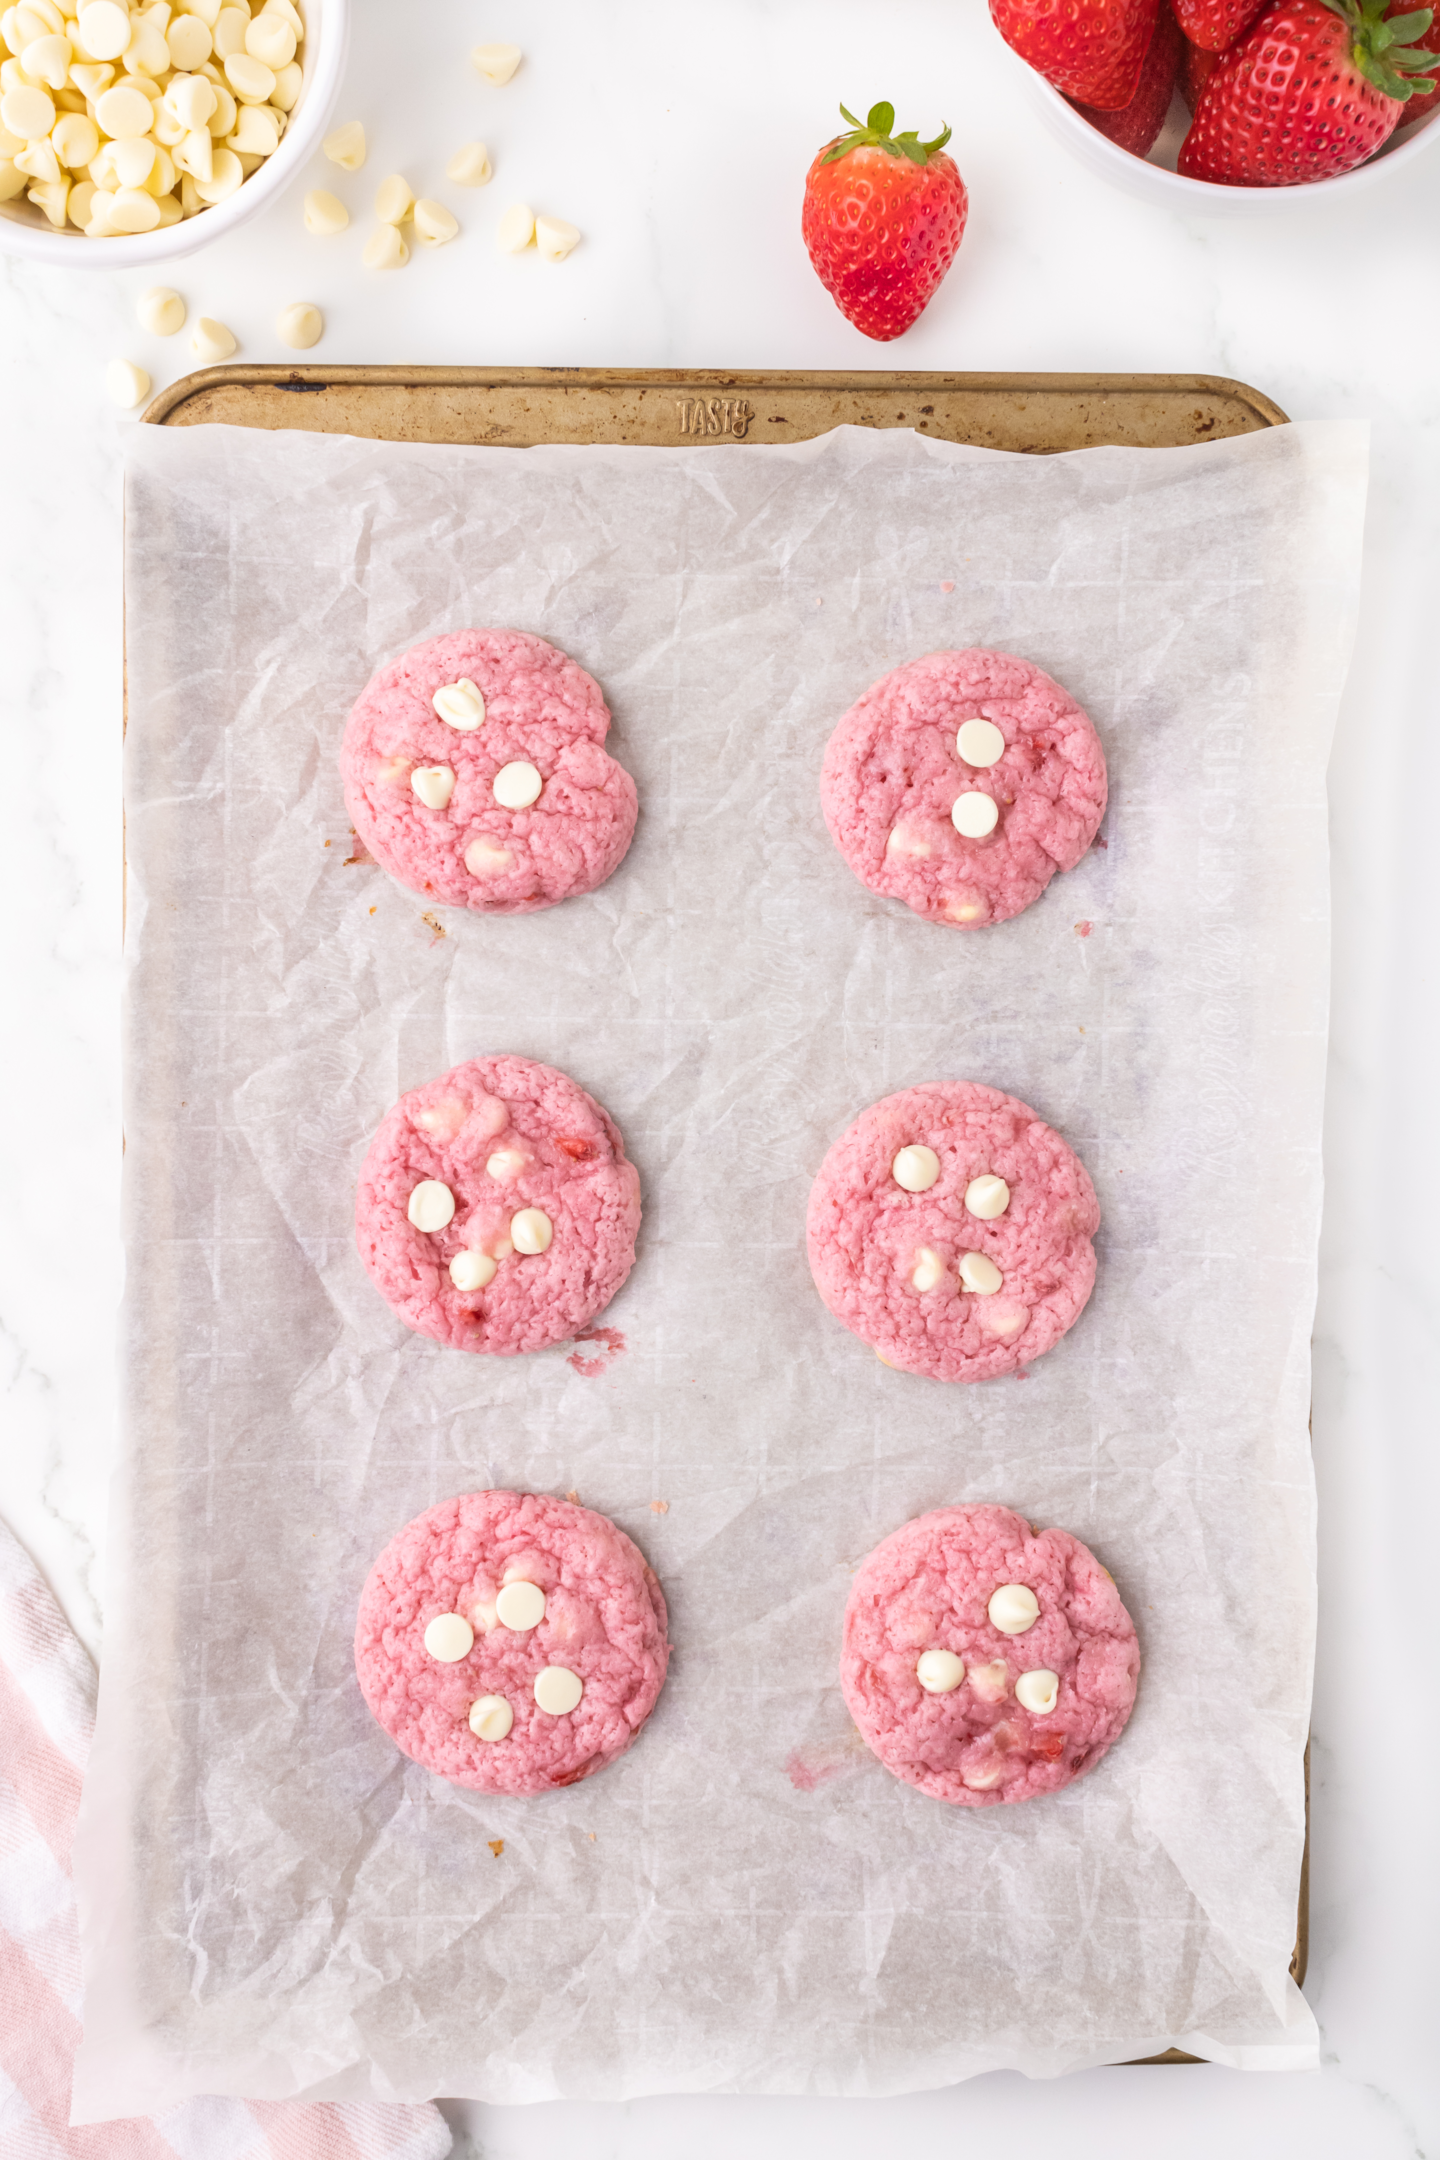 six baked strawberry white chocolate cookies topped with white chocolate chips on baking sheets with parchment paper